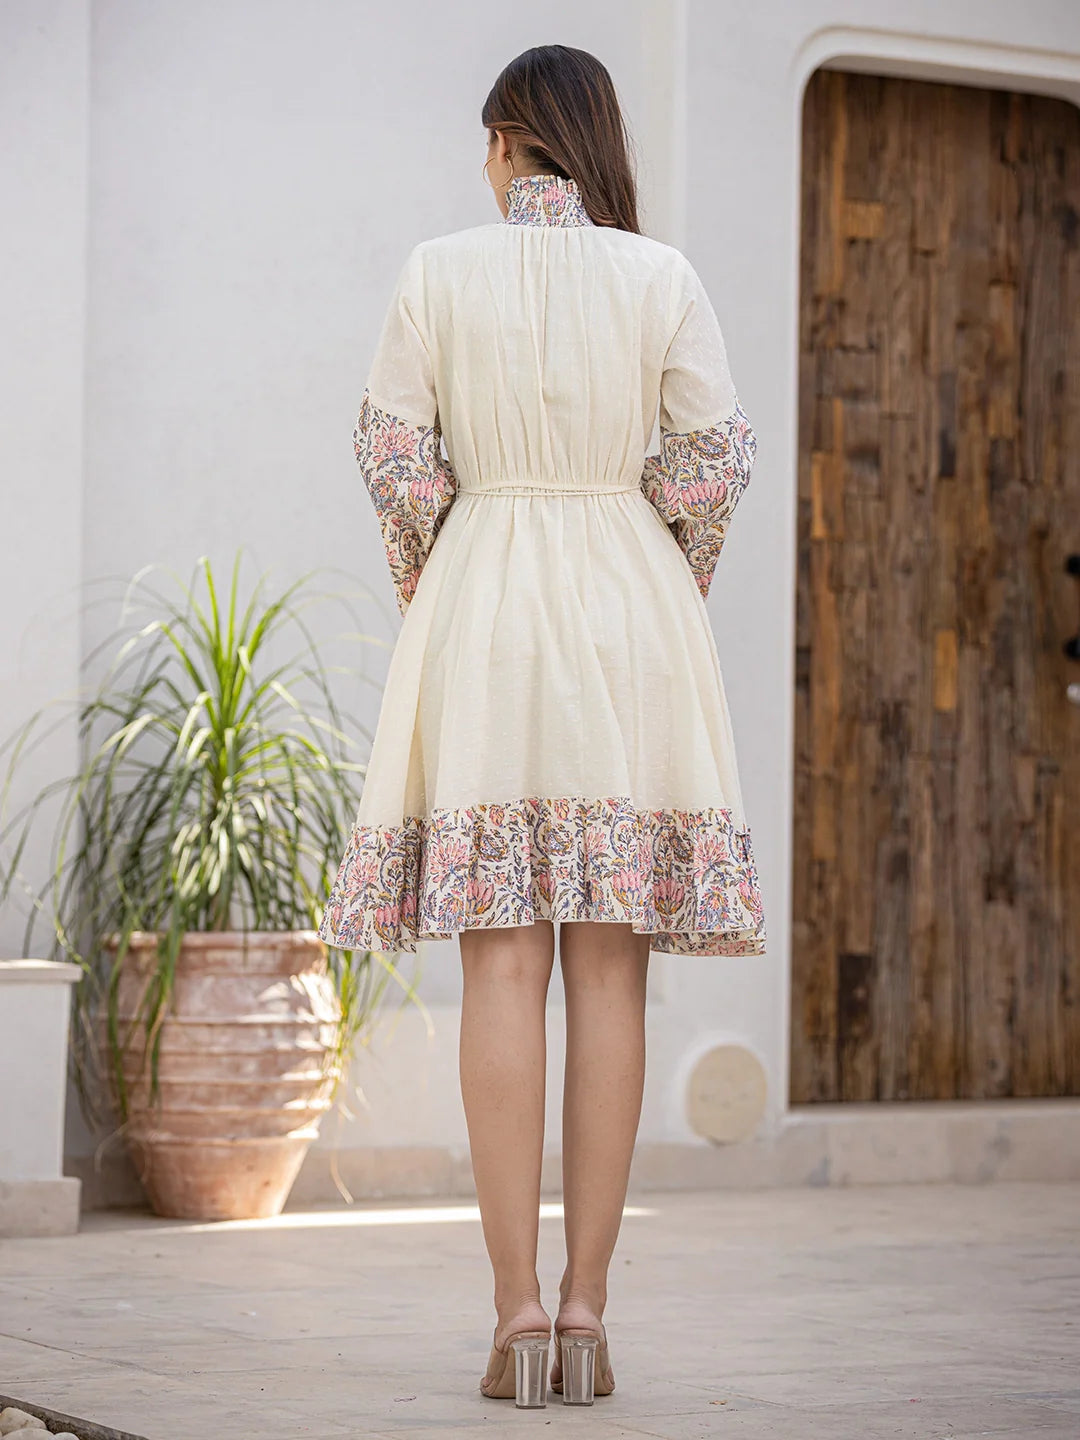 Cloudscape Charm: Cotton Short Dress with Smocked Collar